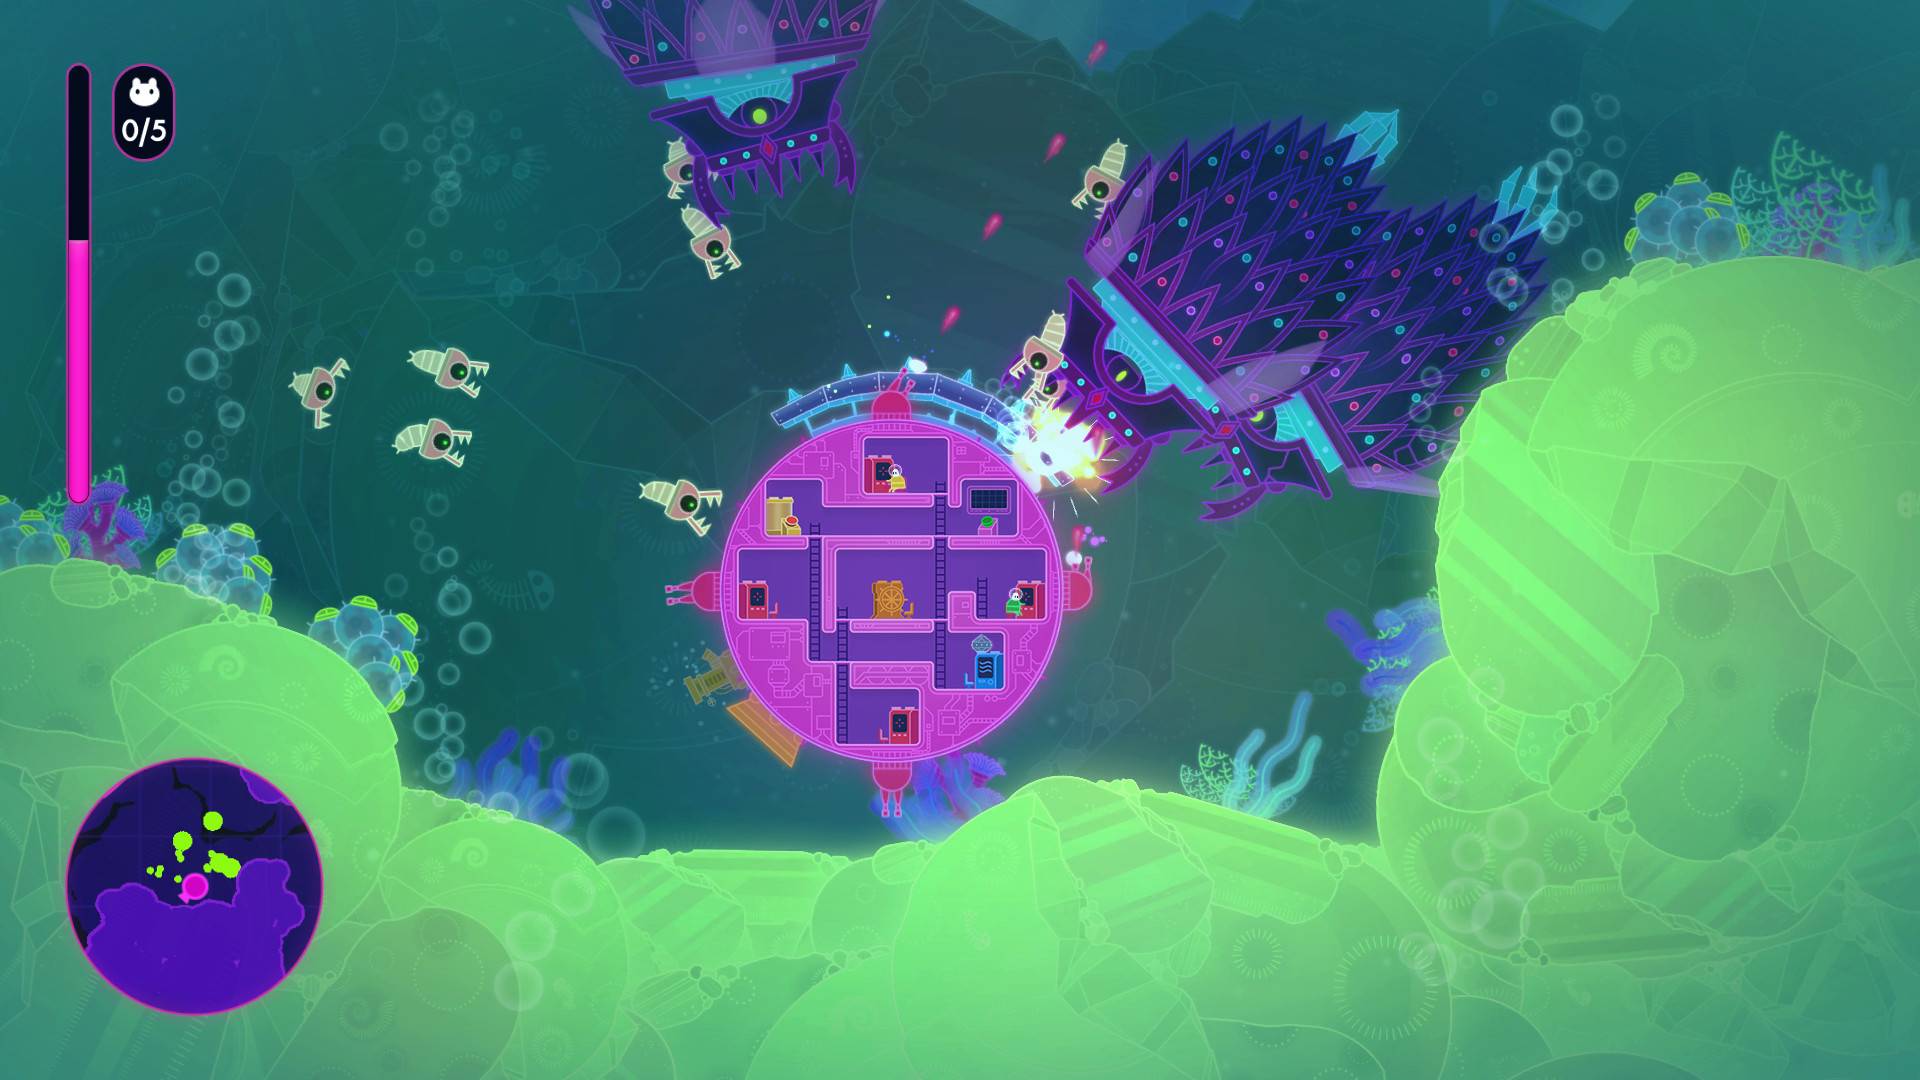 Best Switch multiplayer games: a colourful scene shows a spherical spaceship navigating through space 